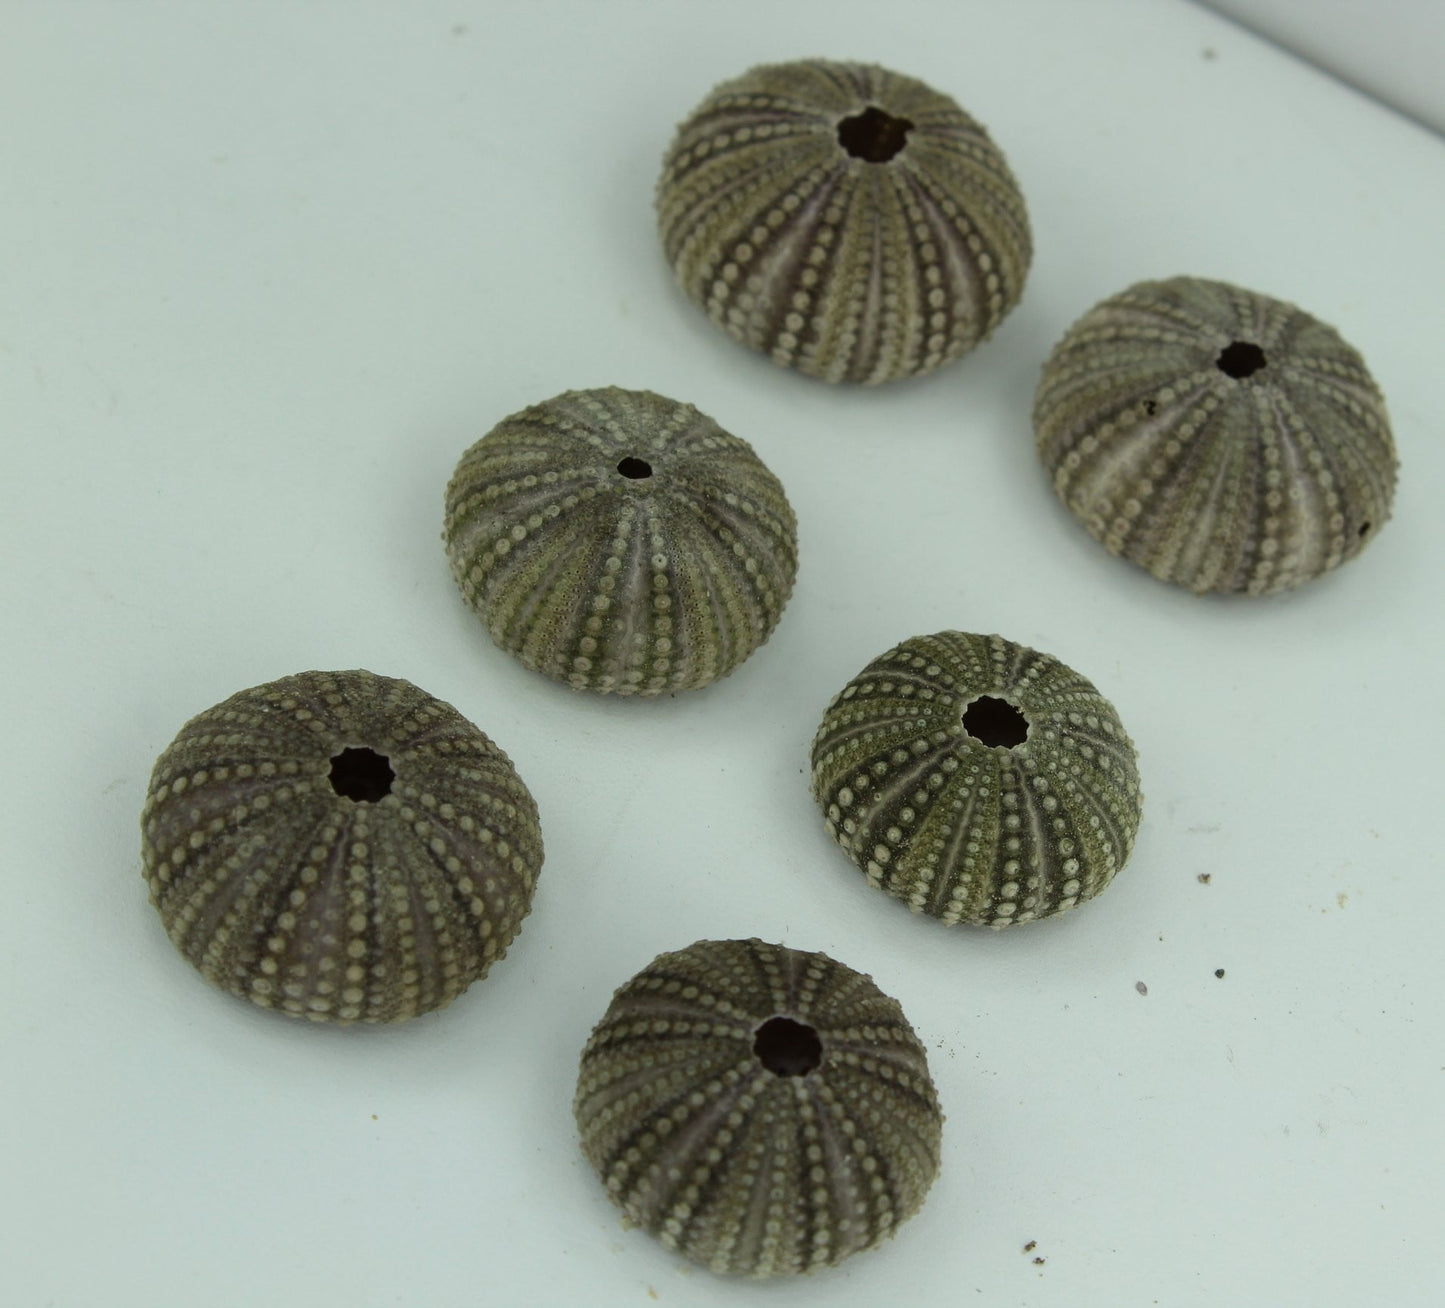 Florida Natural 6 Baby Sea Urchins Estate Collection Jewelry Shell Art Collectibles rare size